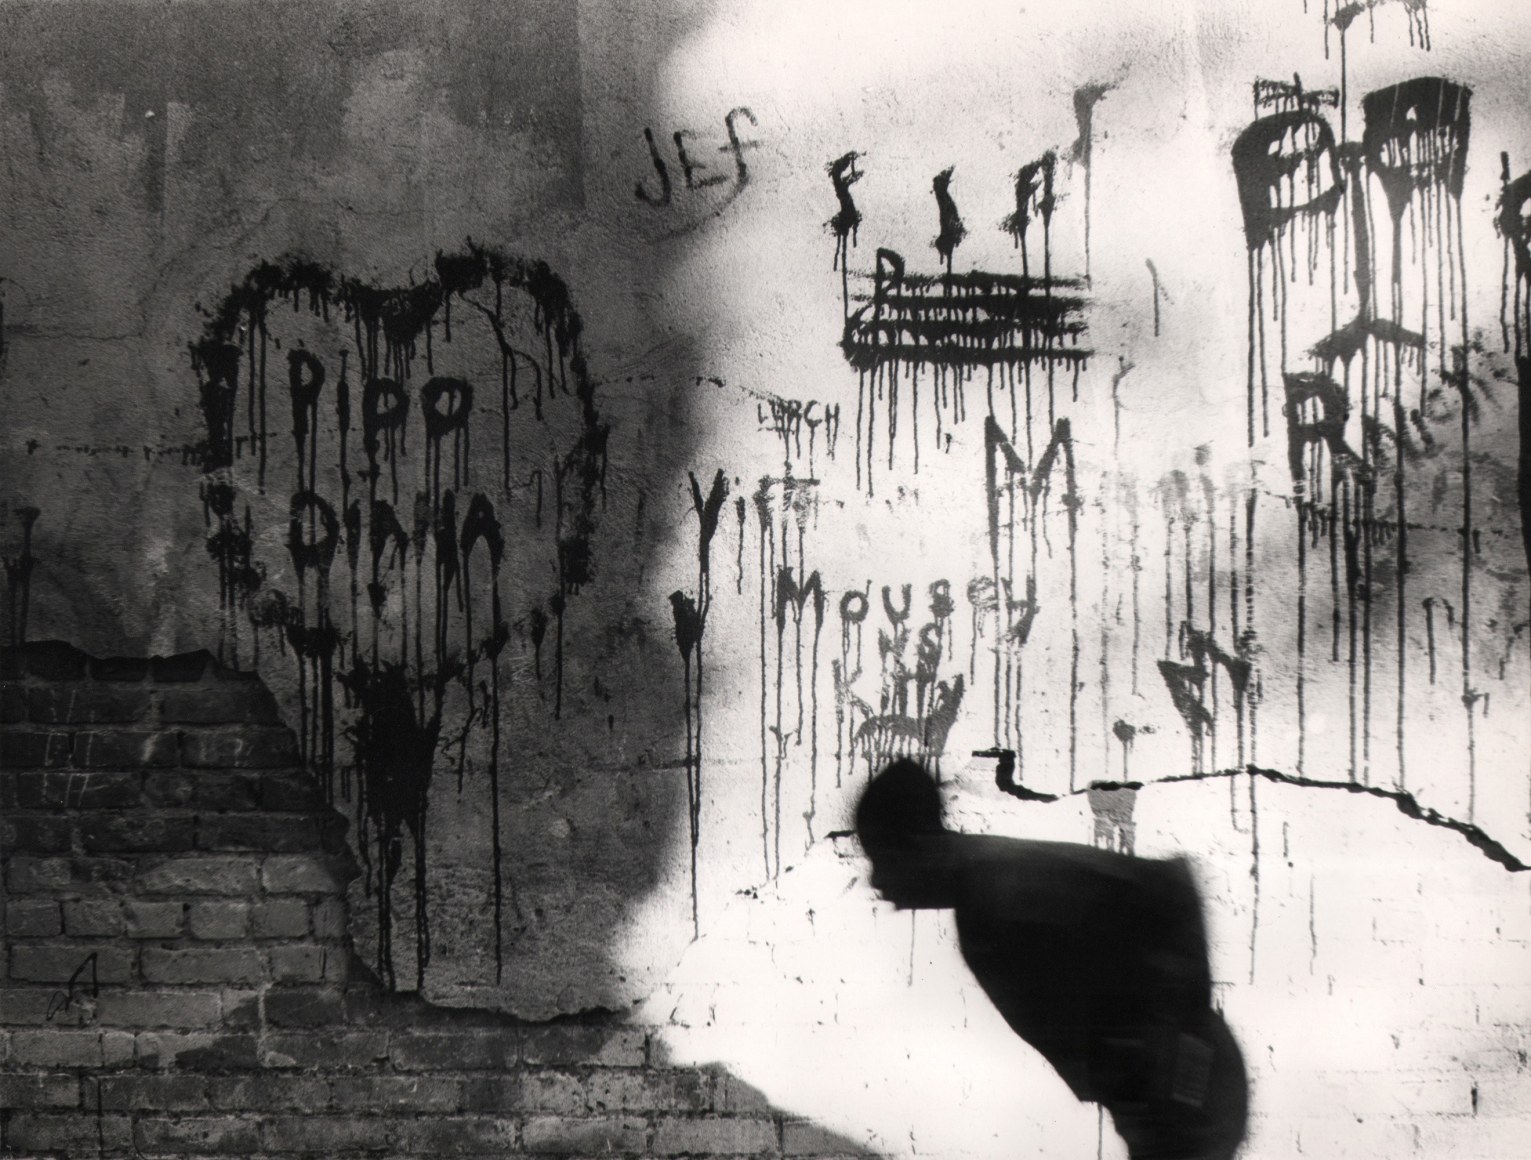 21. Beuford Smith, Wall, Lower East Side, ​1972. A blurred, hunched silhouette moves across the frame towards the left against a wall covered in graffiti.